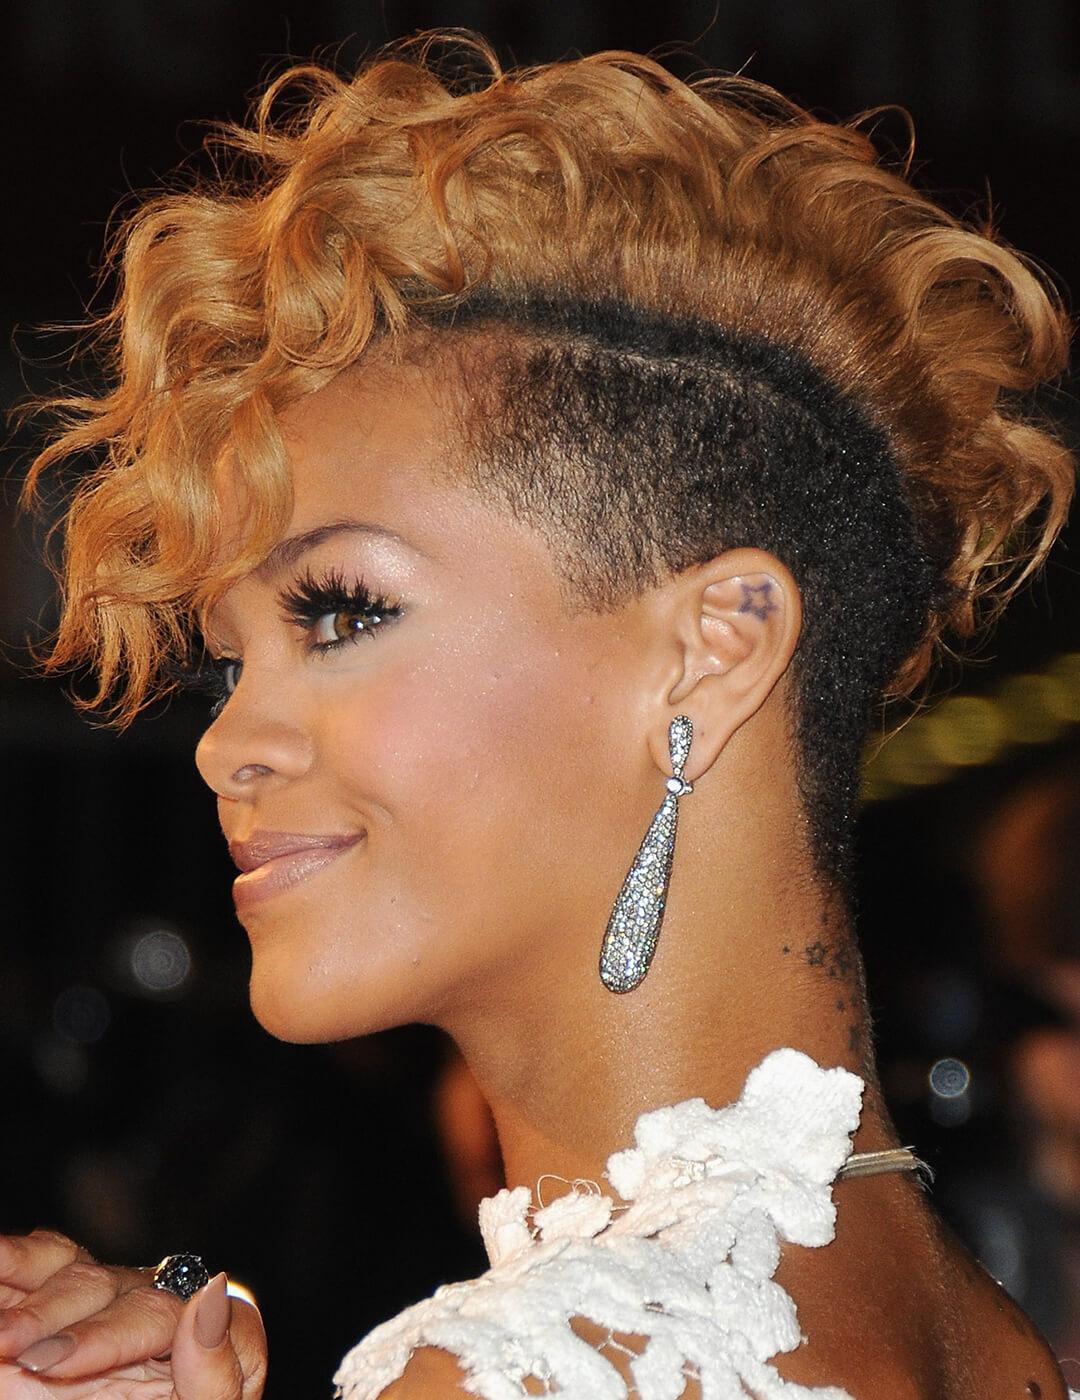 Rihanna sporting a two-toned undercut hairstyle, neutral makeup look, silver dangling earrings, and white floral dress at the red carpet